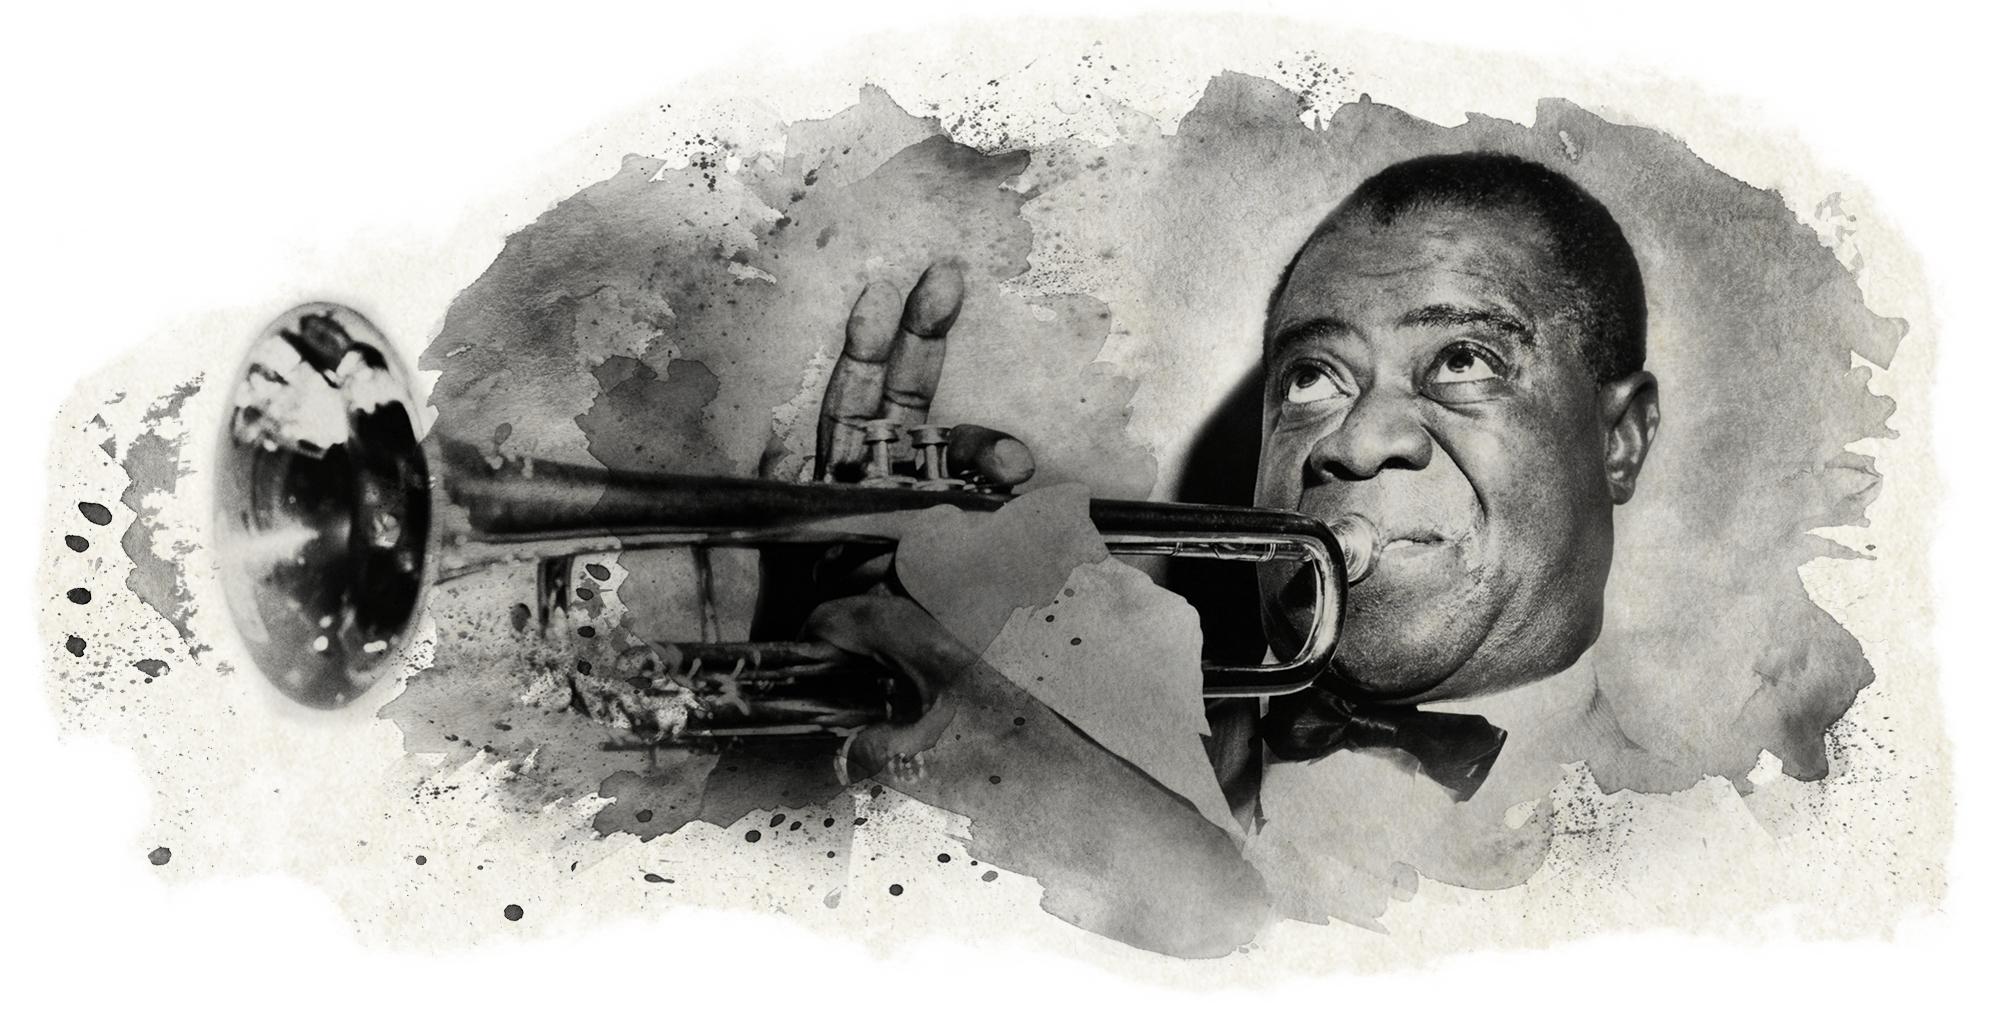 Pops': Louis Armstrong, In His Own Words : NPR